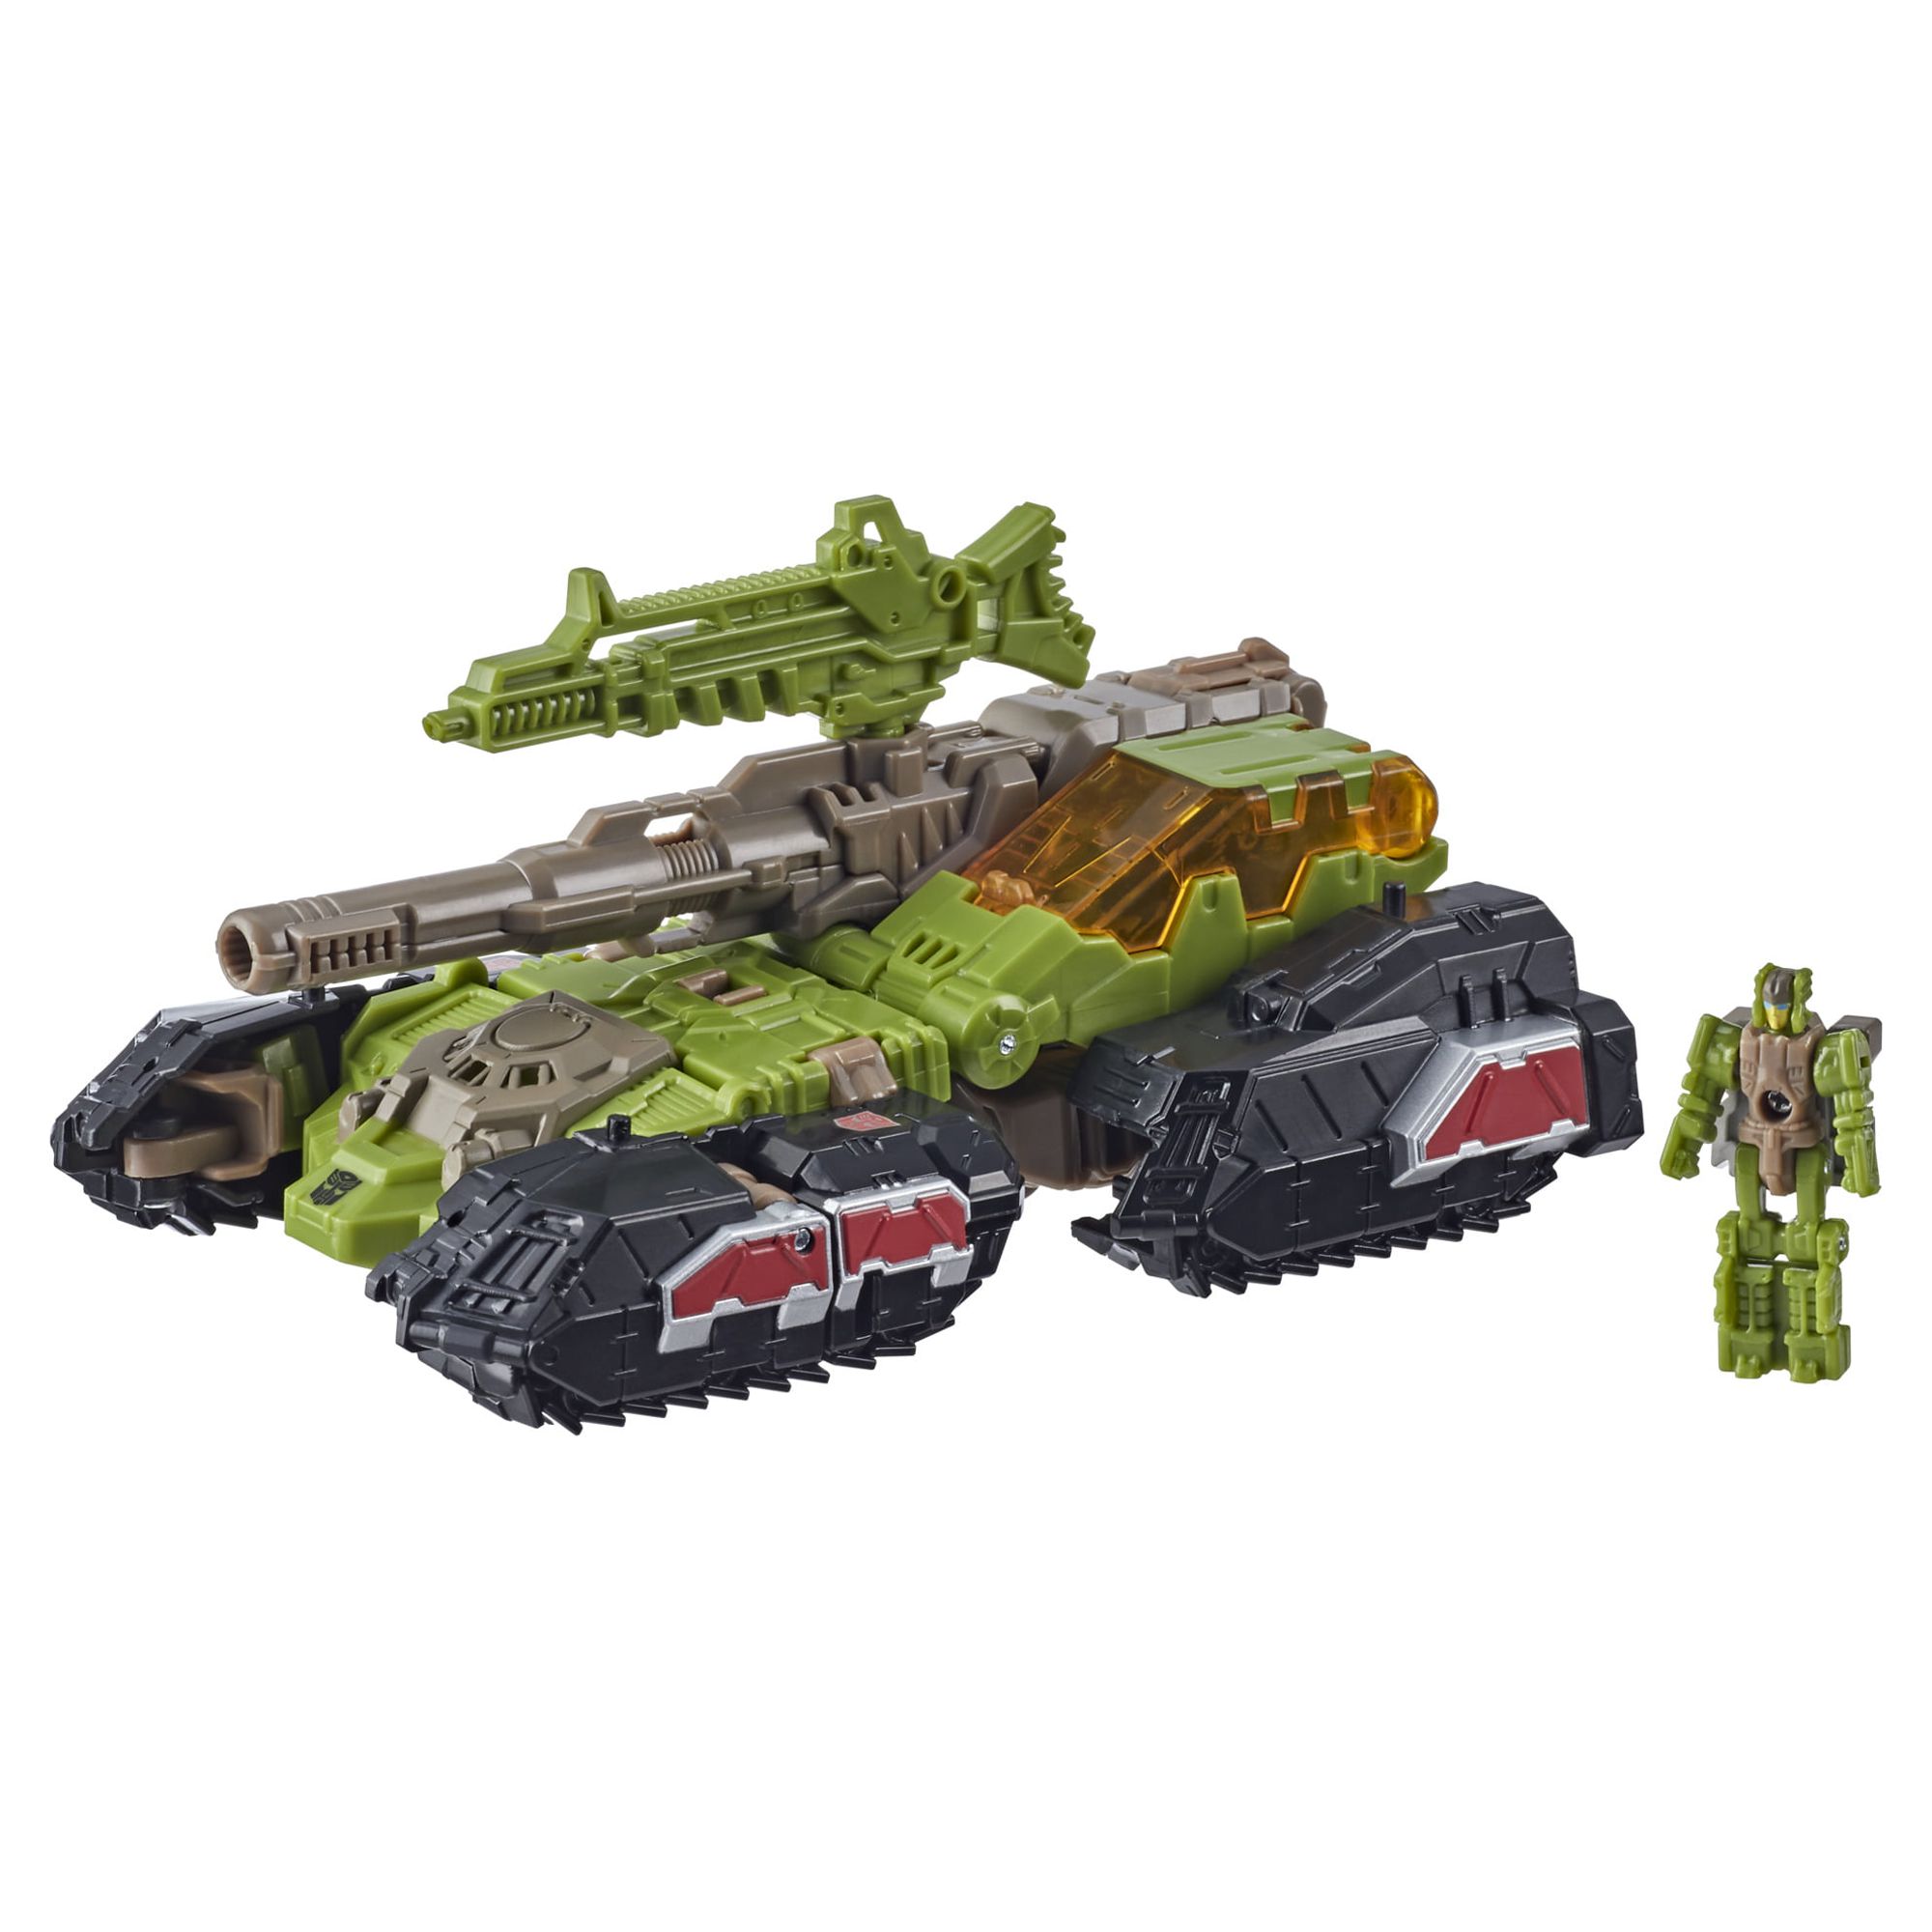 Transformers: Headmaster Hardhead Kids Toy Action Figure for Boys and Girls (3”) - image 3 of 8